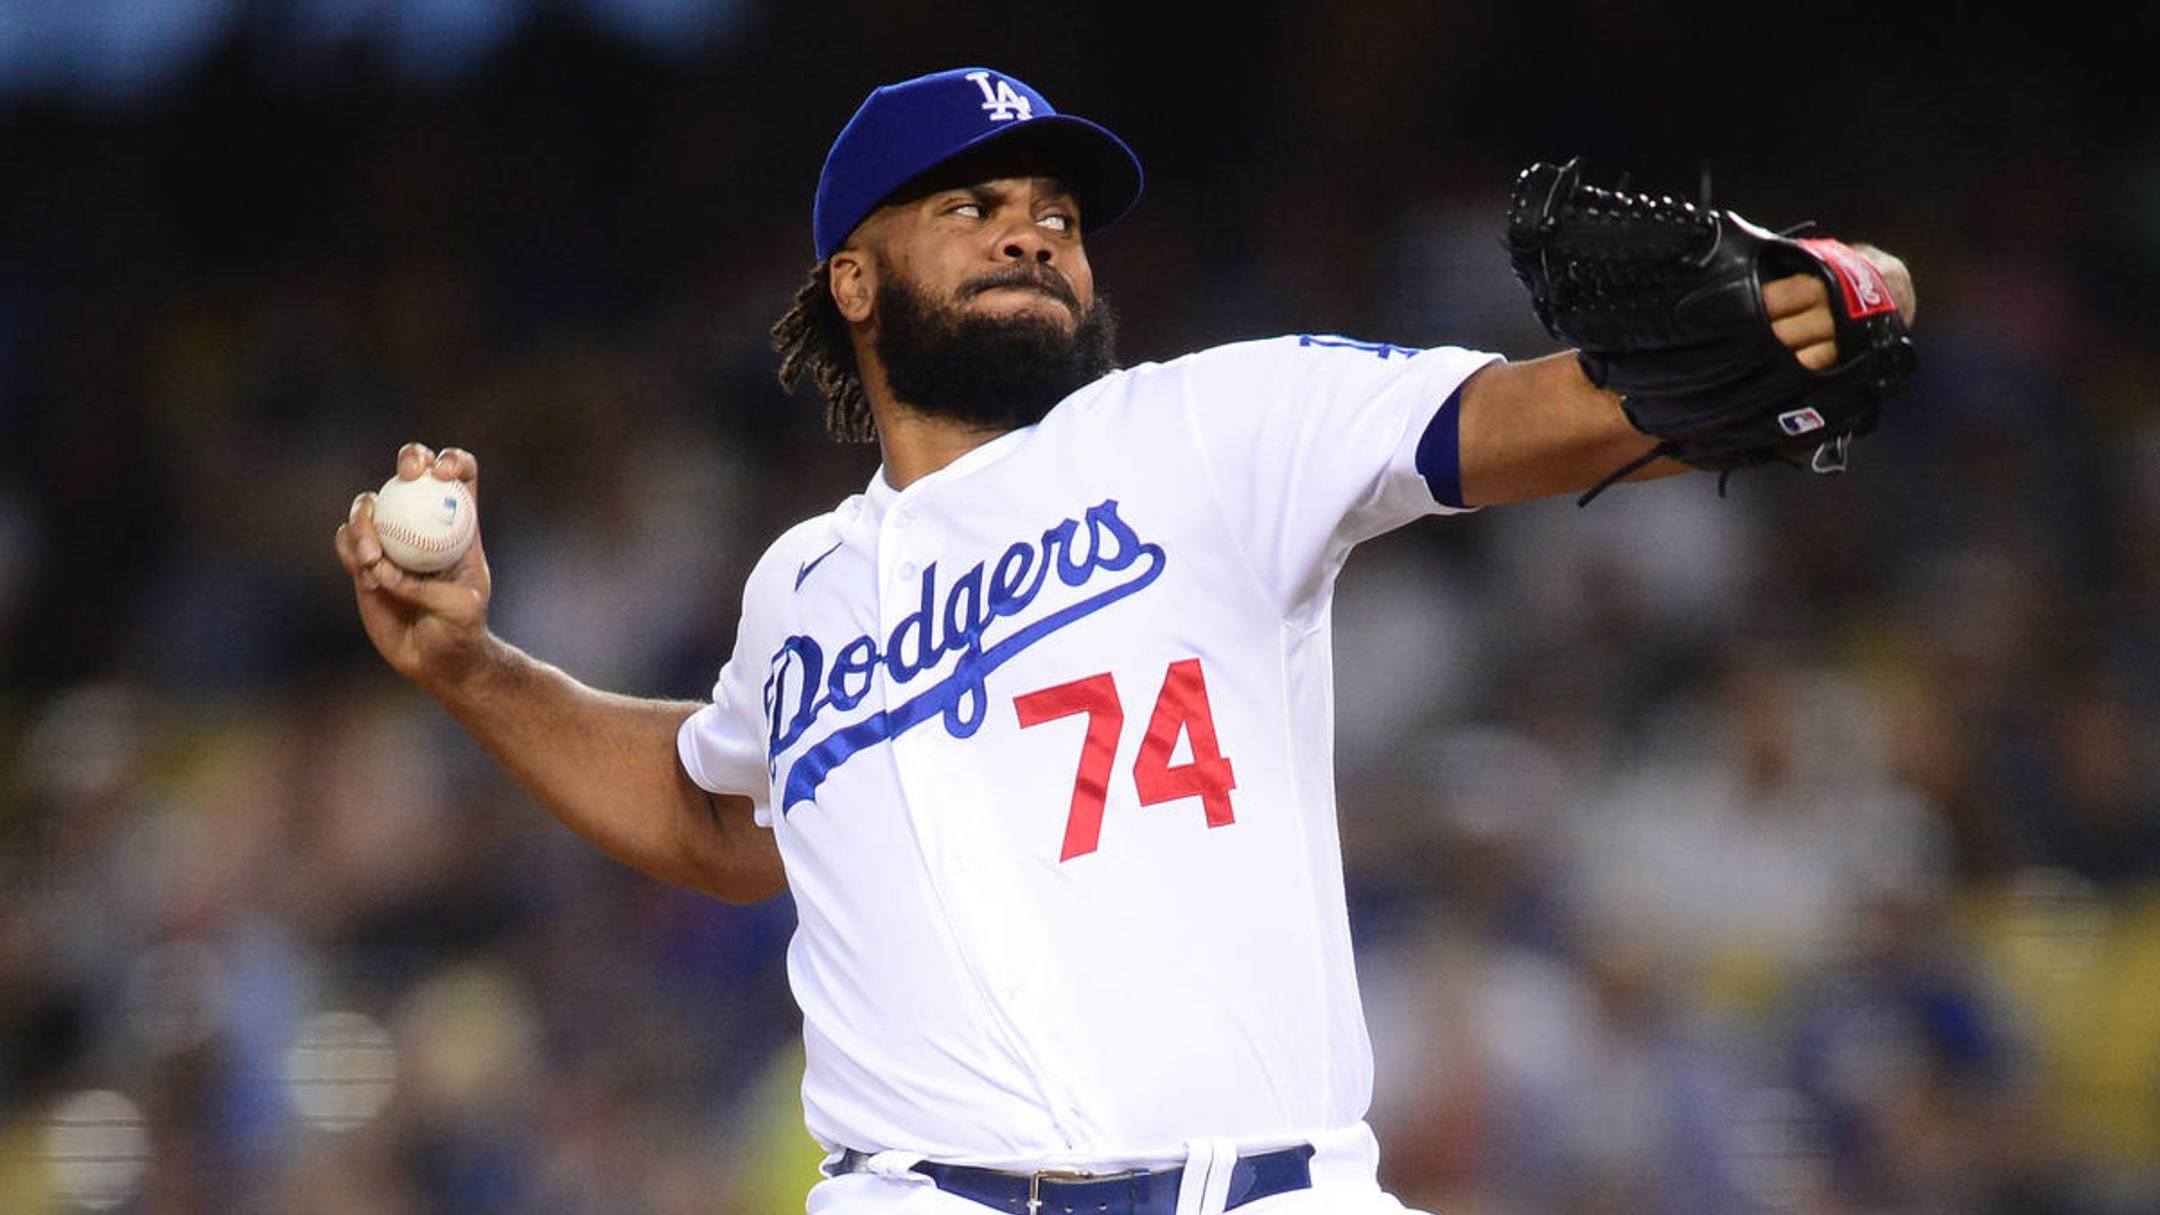 kenleyjansen warming up in real time slow motion to preserve